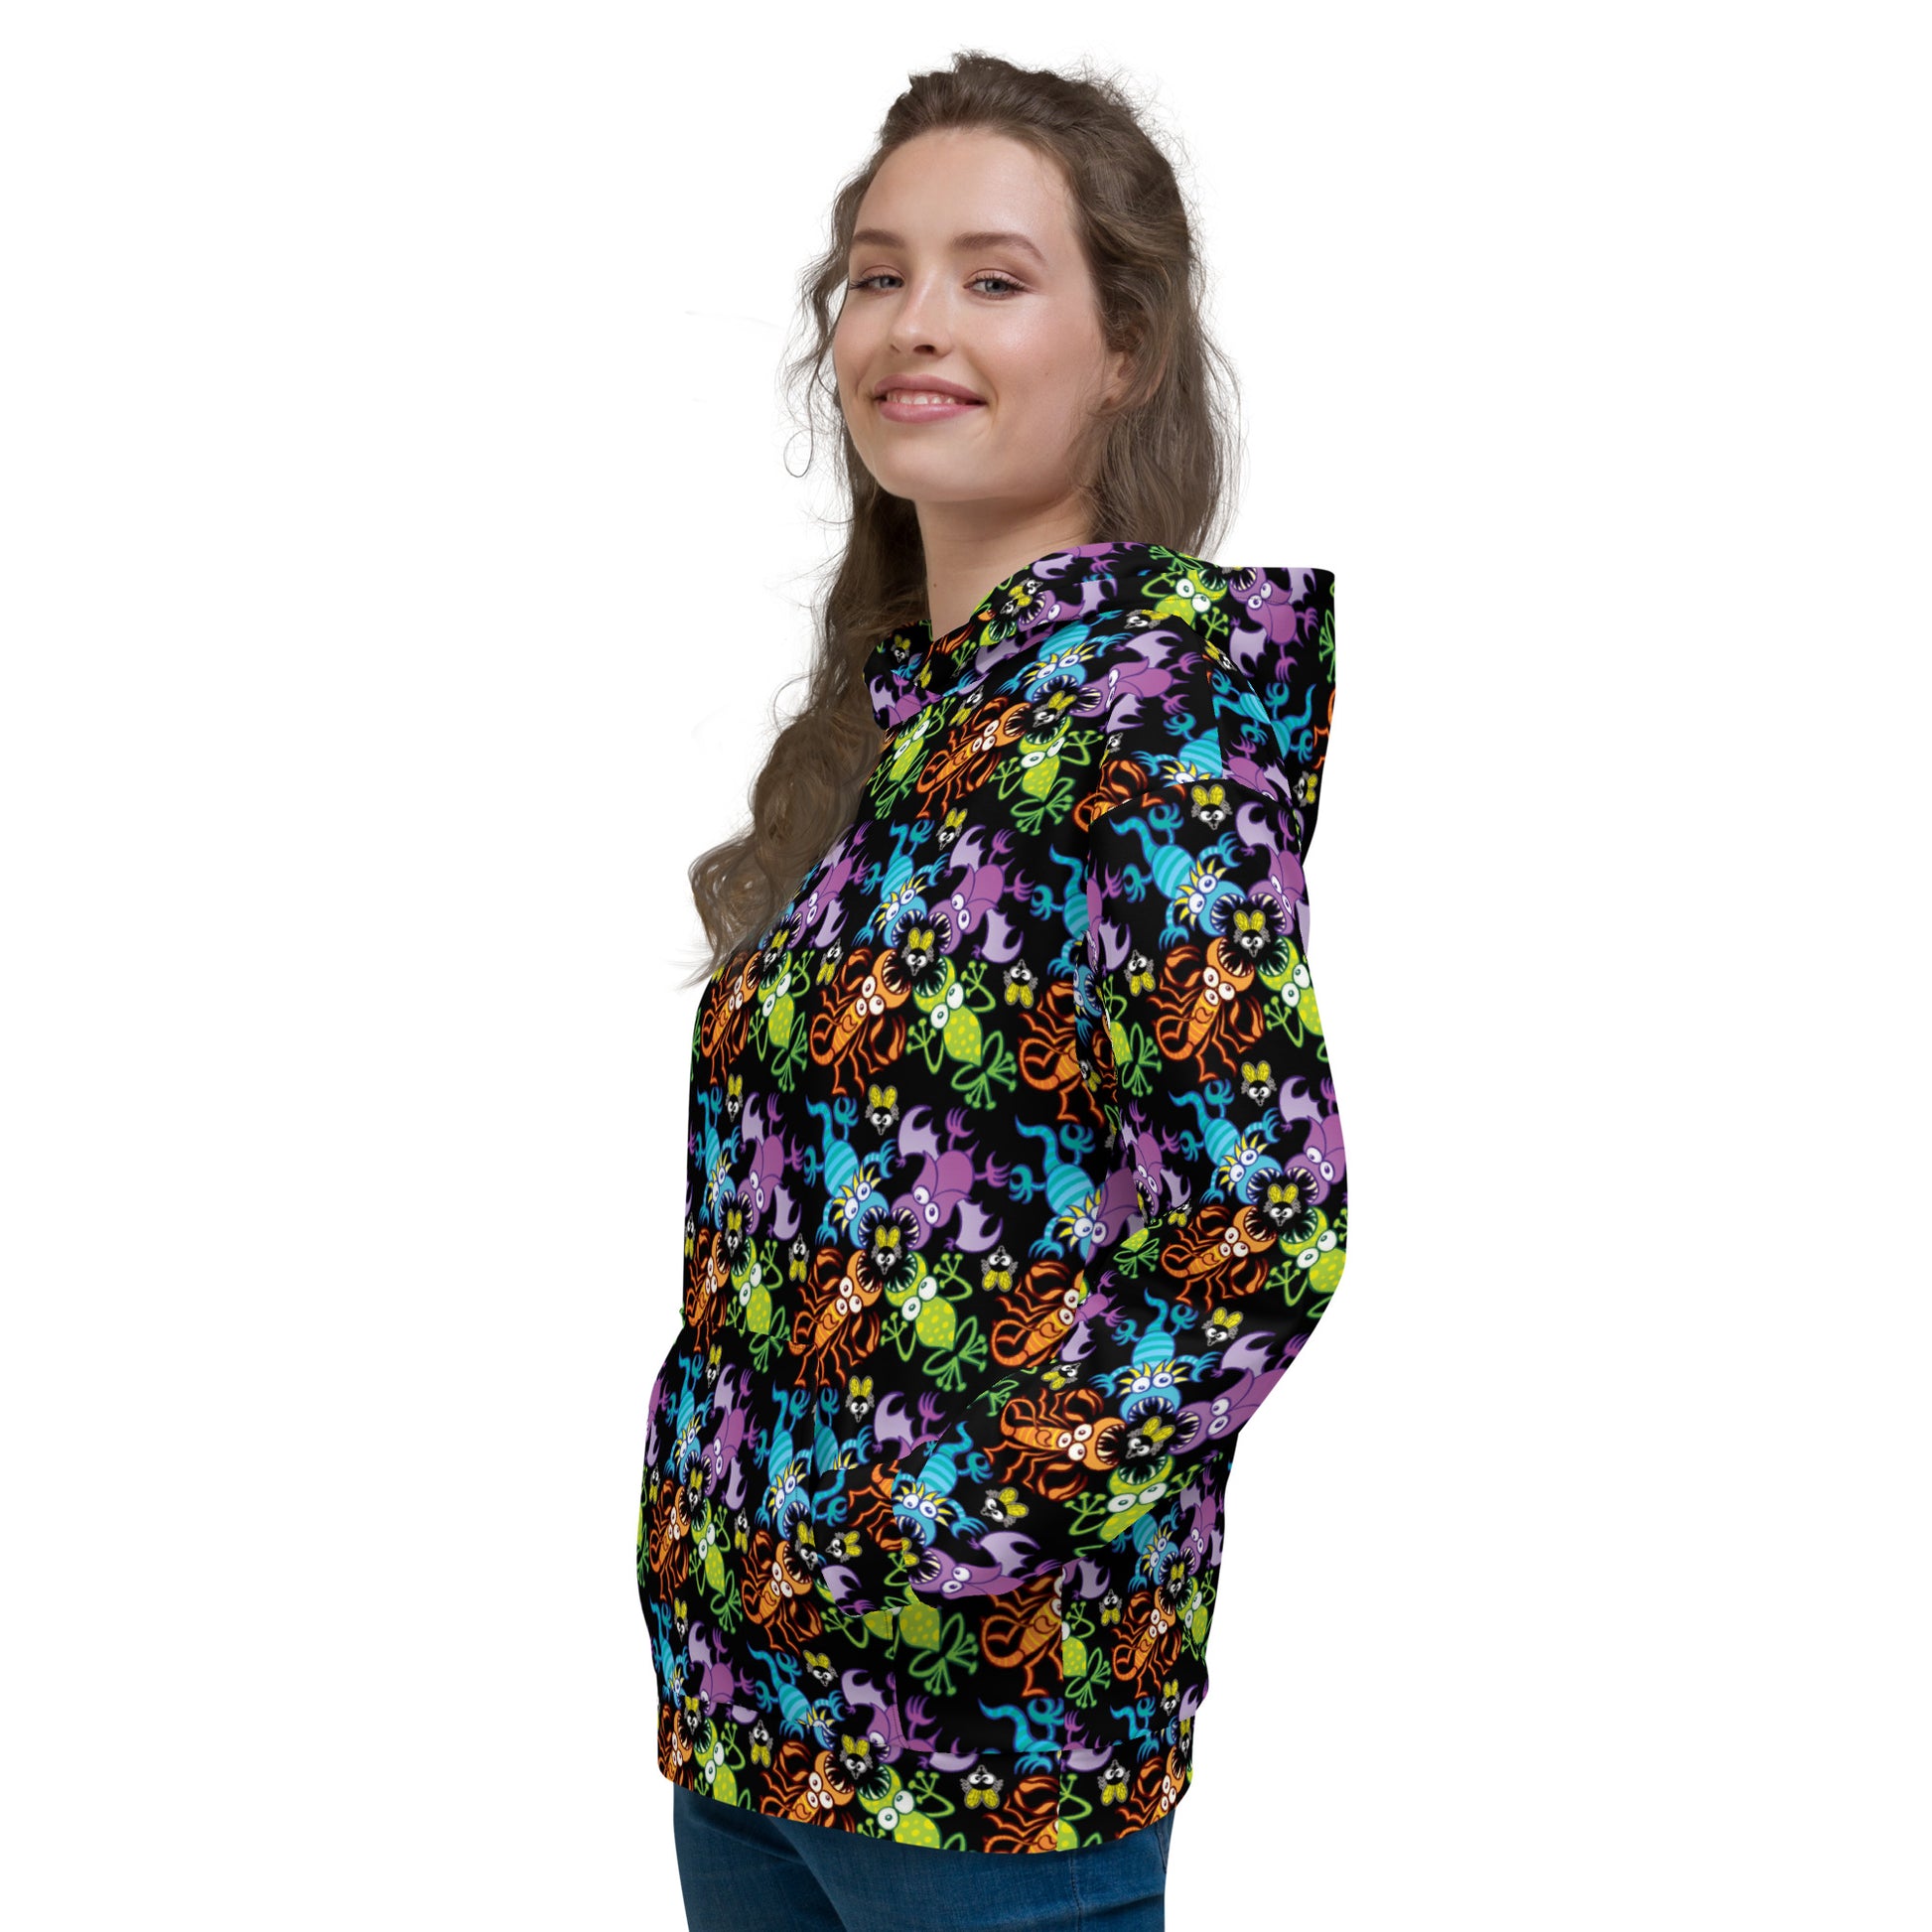 Beautiful woman wearing an Unisex Hoodie All-over printed with Bat, scorpion, lizard and frog fighting over an unlucky fly